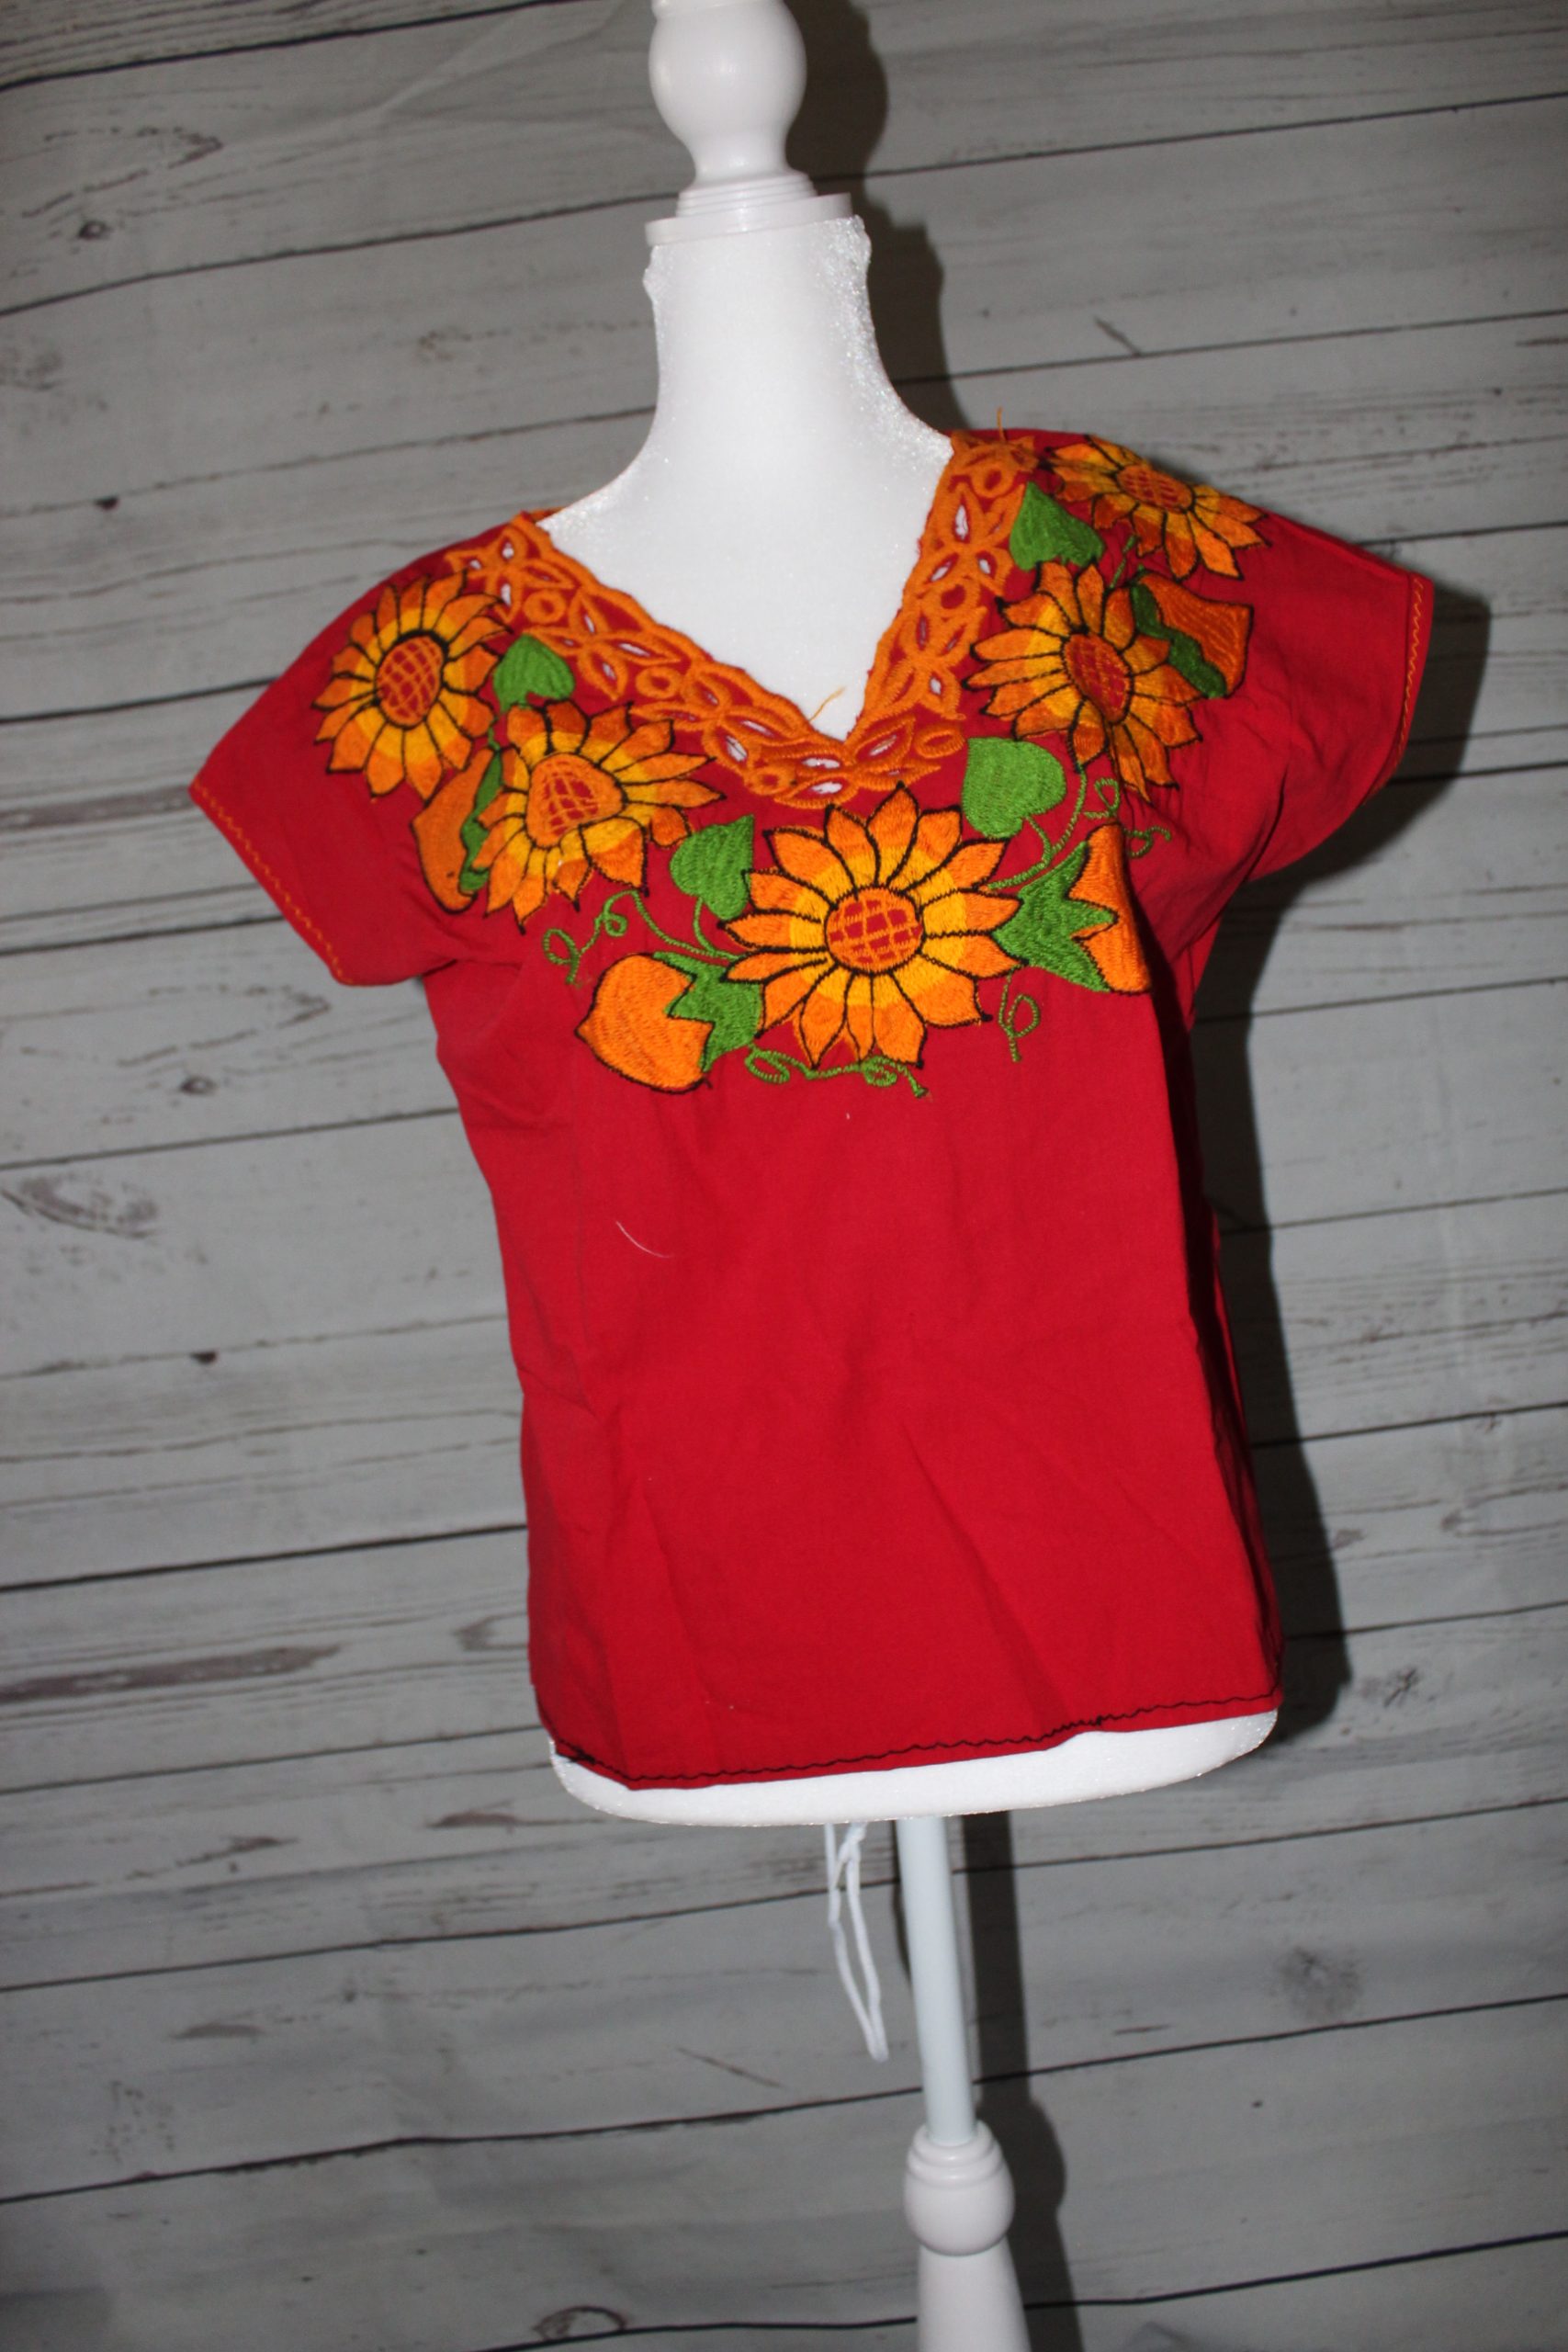 x-small red blouse with embroidered sunflowers and green leaves